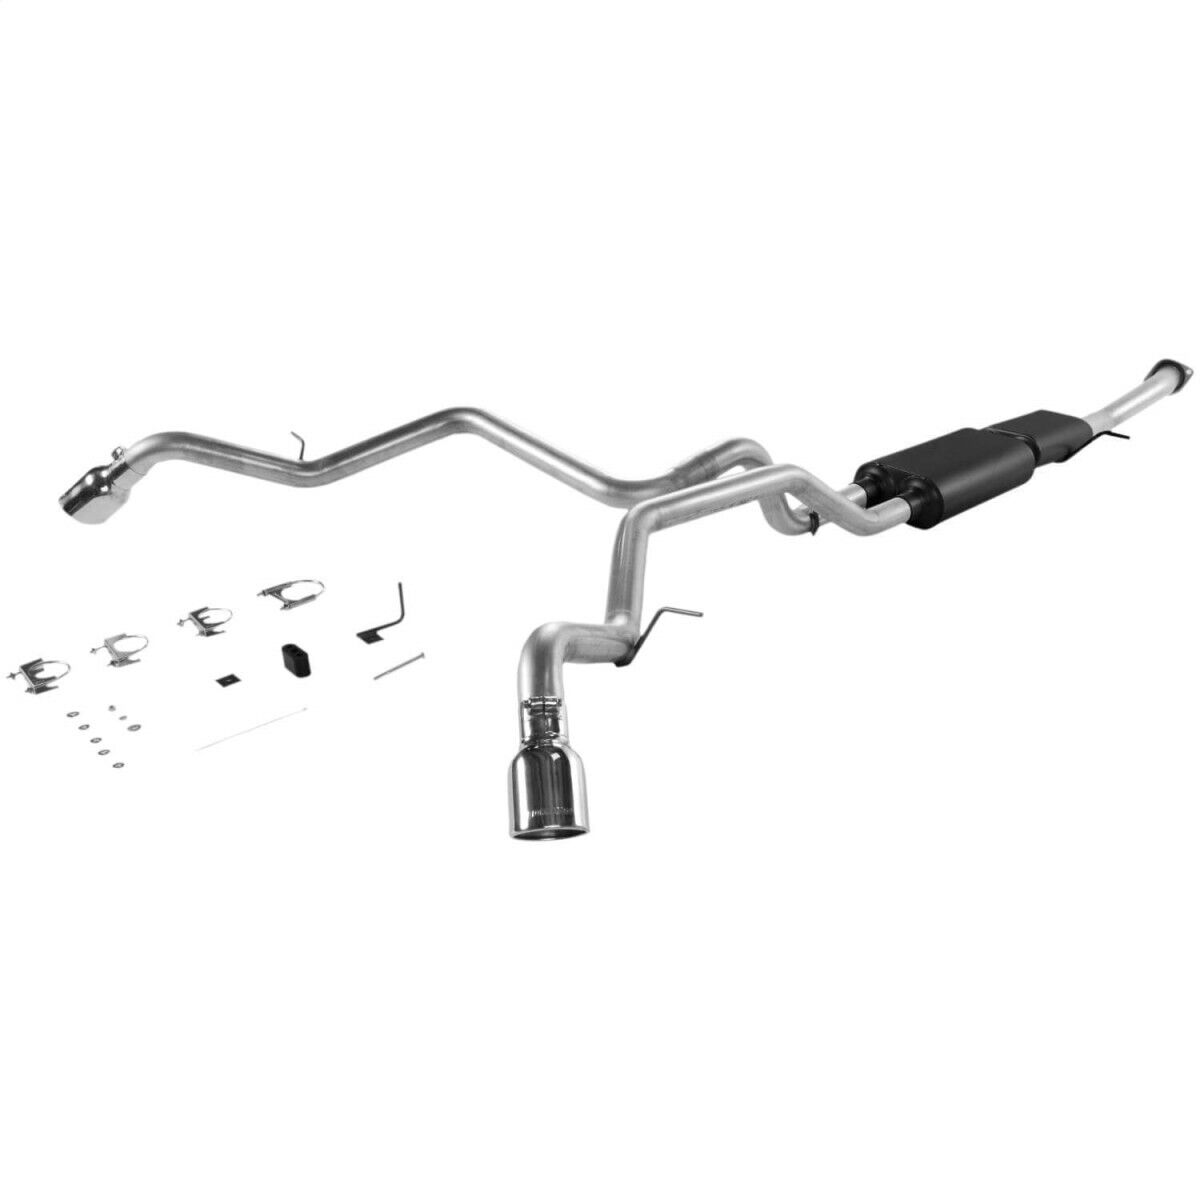 17342 Flowmaster Exhaust System for Chevy Avalanche Suburban Yukon GMC 1500 XL